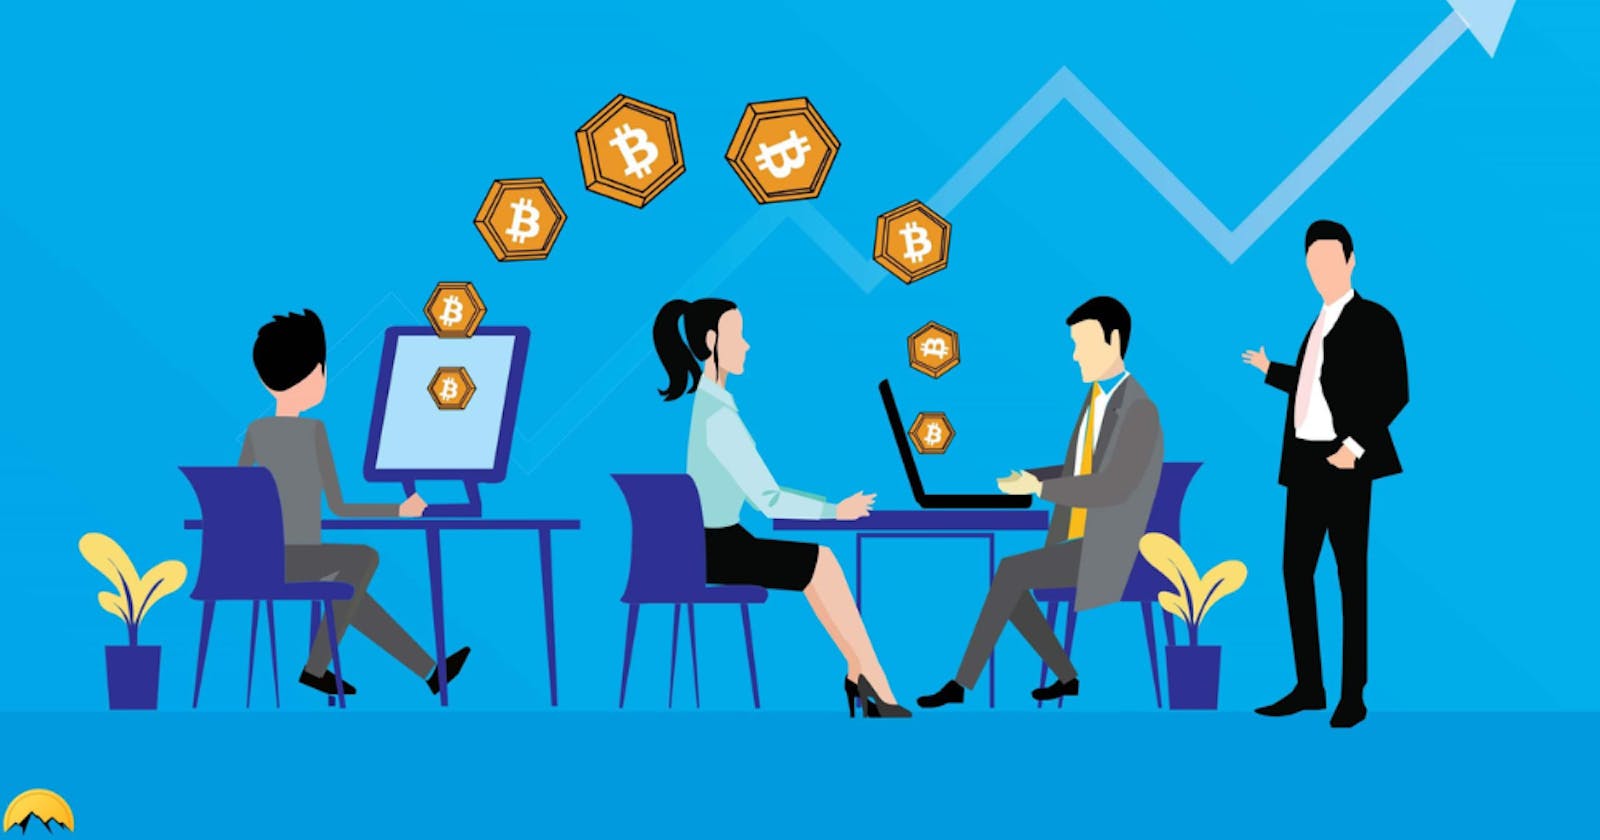 What is the purpose of social cryptocurrency trading?